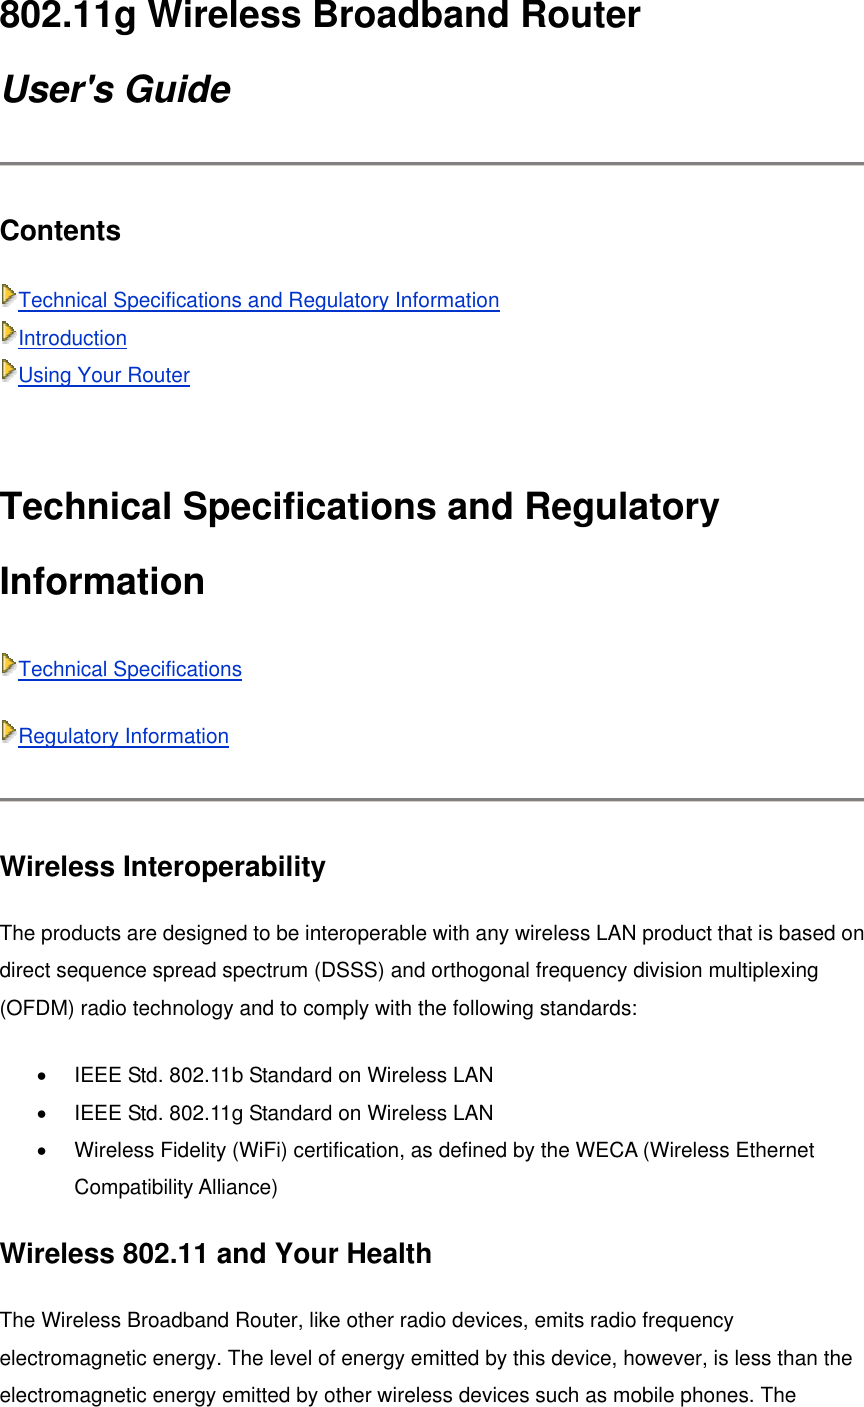 802.11g Wireless Broadband Router User&apos;s Guide Contents  Technical Specifications and Regulatory Information Introduction Using Your Router  Technical Specifications and Regulatory Information Technical Specifications Regulatory Information  Wireless Interoperability   The products are designed to be interoperable with any wireless LAN product that is based on direct sequence spread spectrum (DSSS) and orthogonal frequency division multiplexing (OFDM) radio technology and to comply with the following standards: •  IEEE Std. 802.11b Standard on Wireless LAN   •  IEEE Std. 802.11g Standard on Wireless LAN   •  Wireless Fidelity (WiFi) certification, as defined by the WECA (Wireless Ethernet Compatibility Alliance)   Wireless 802.11 and Your Health The Wireless Broadband Router, like other radio devices, emits radio frequency electromagnetic energy. The level of energy emitted by this device, however, is less than the electromagnetic energy emitted by other wireless devices such as mobile phones. The 